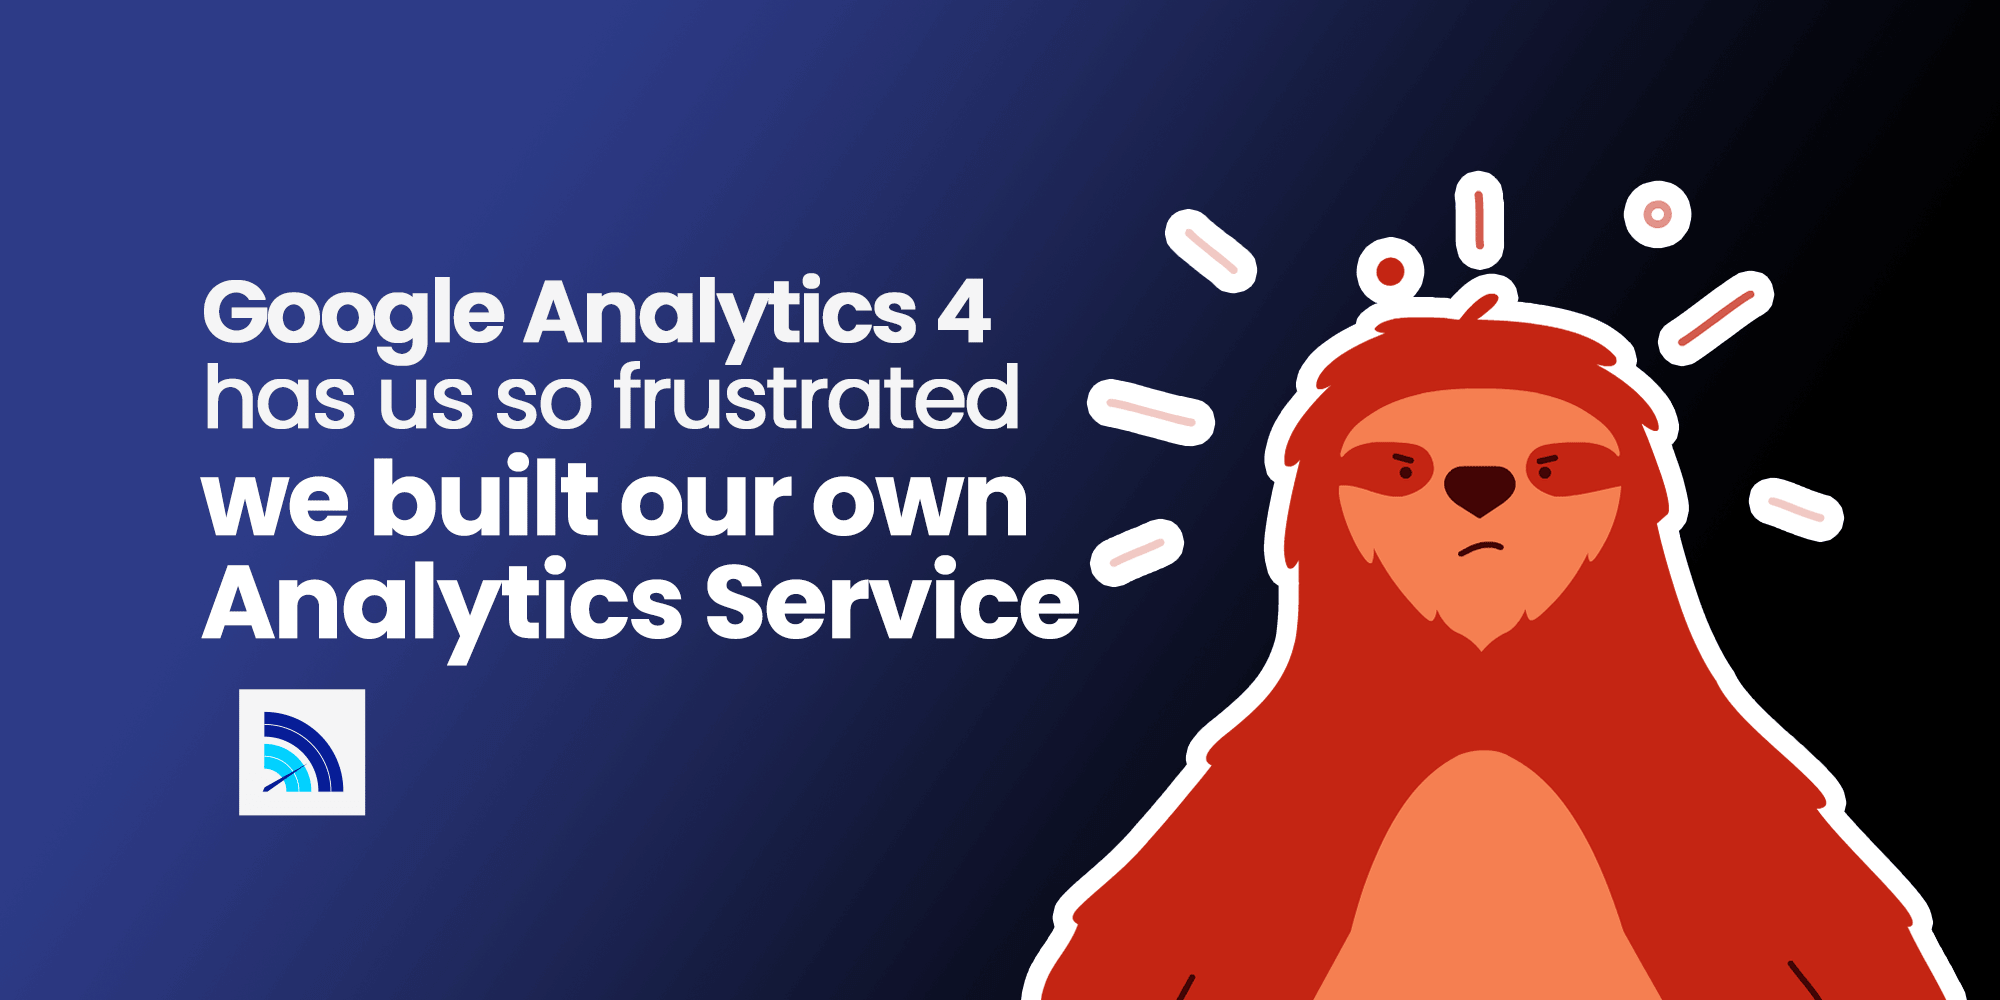 Google Analytics 4 Has Me So Frustrated, We Built Our Own Analytics Service